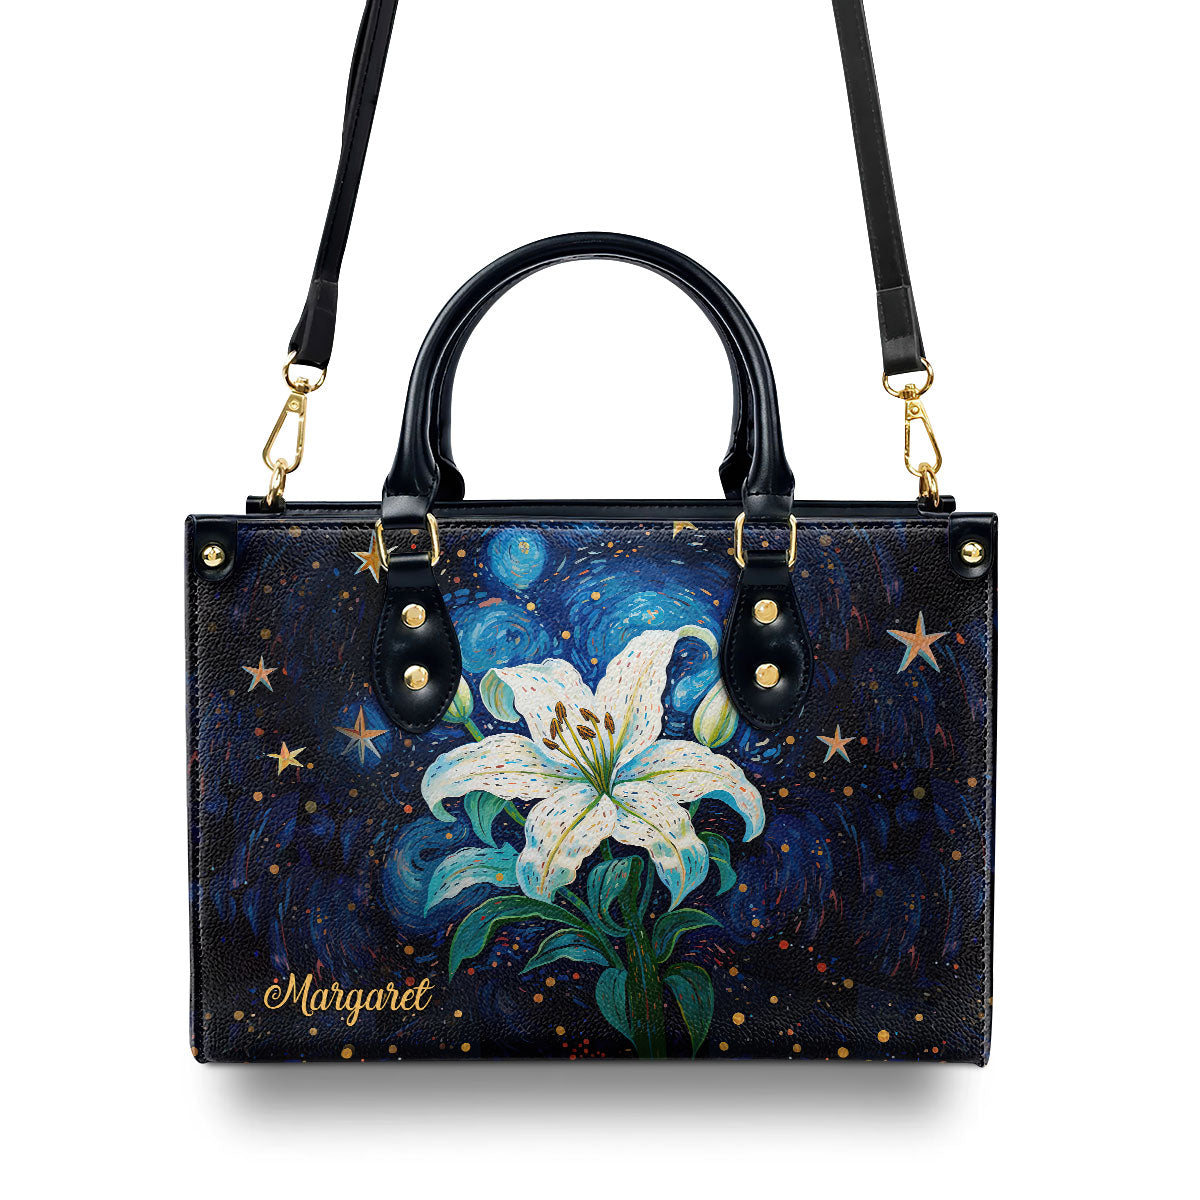 Lily In The Starry Night Style - Personalized Leather Handbag MSM17